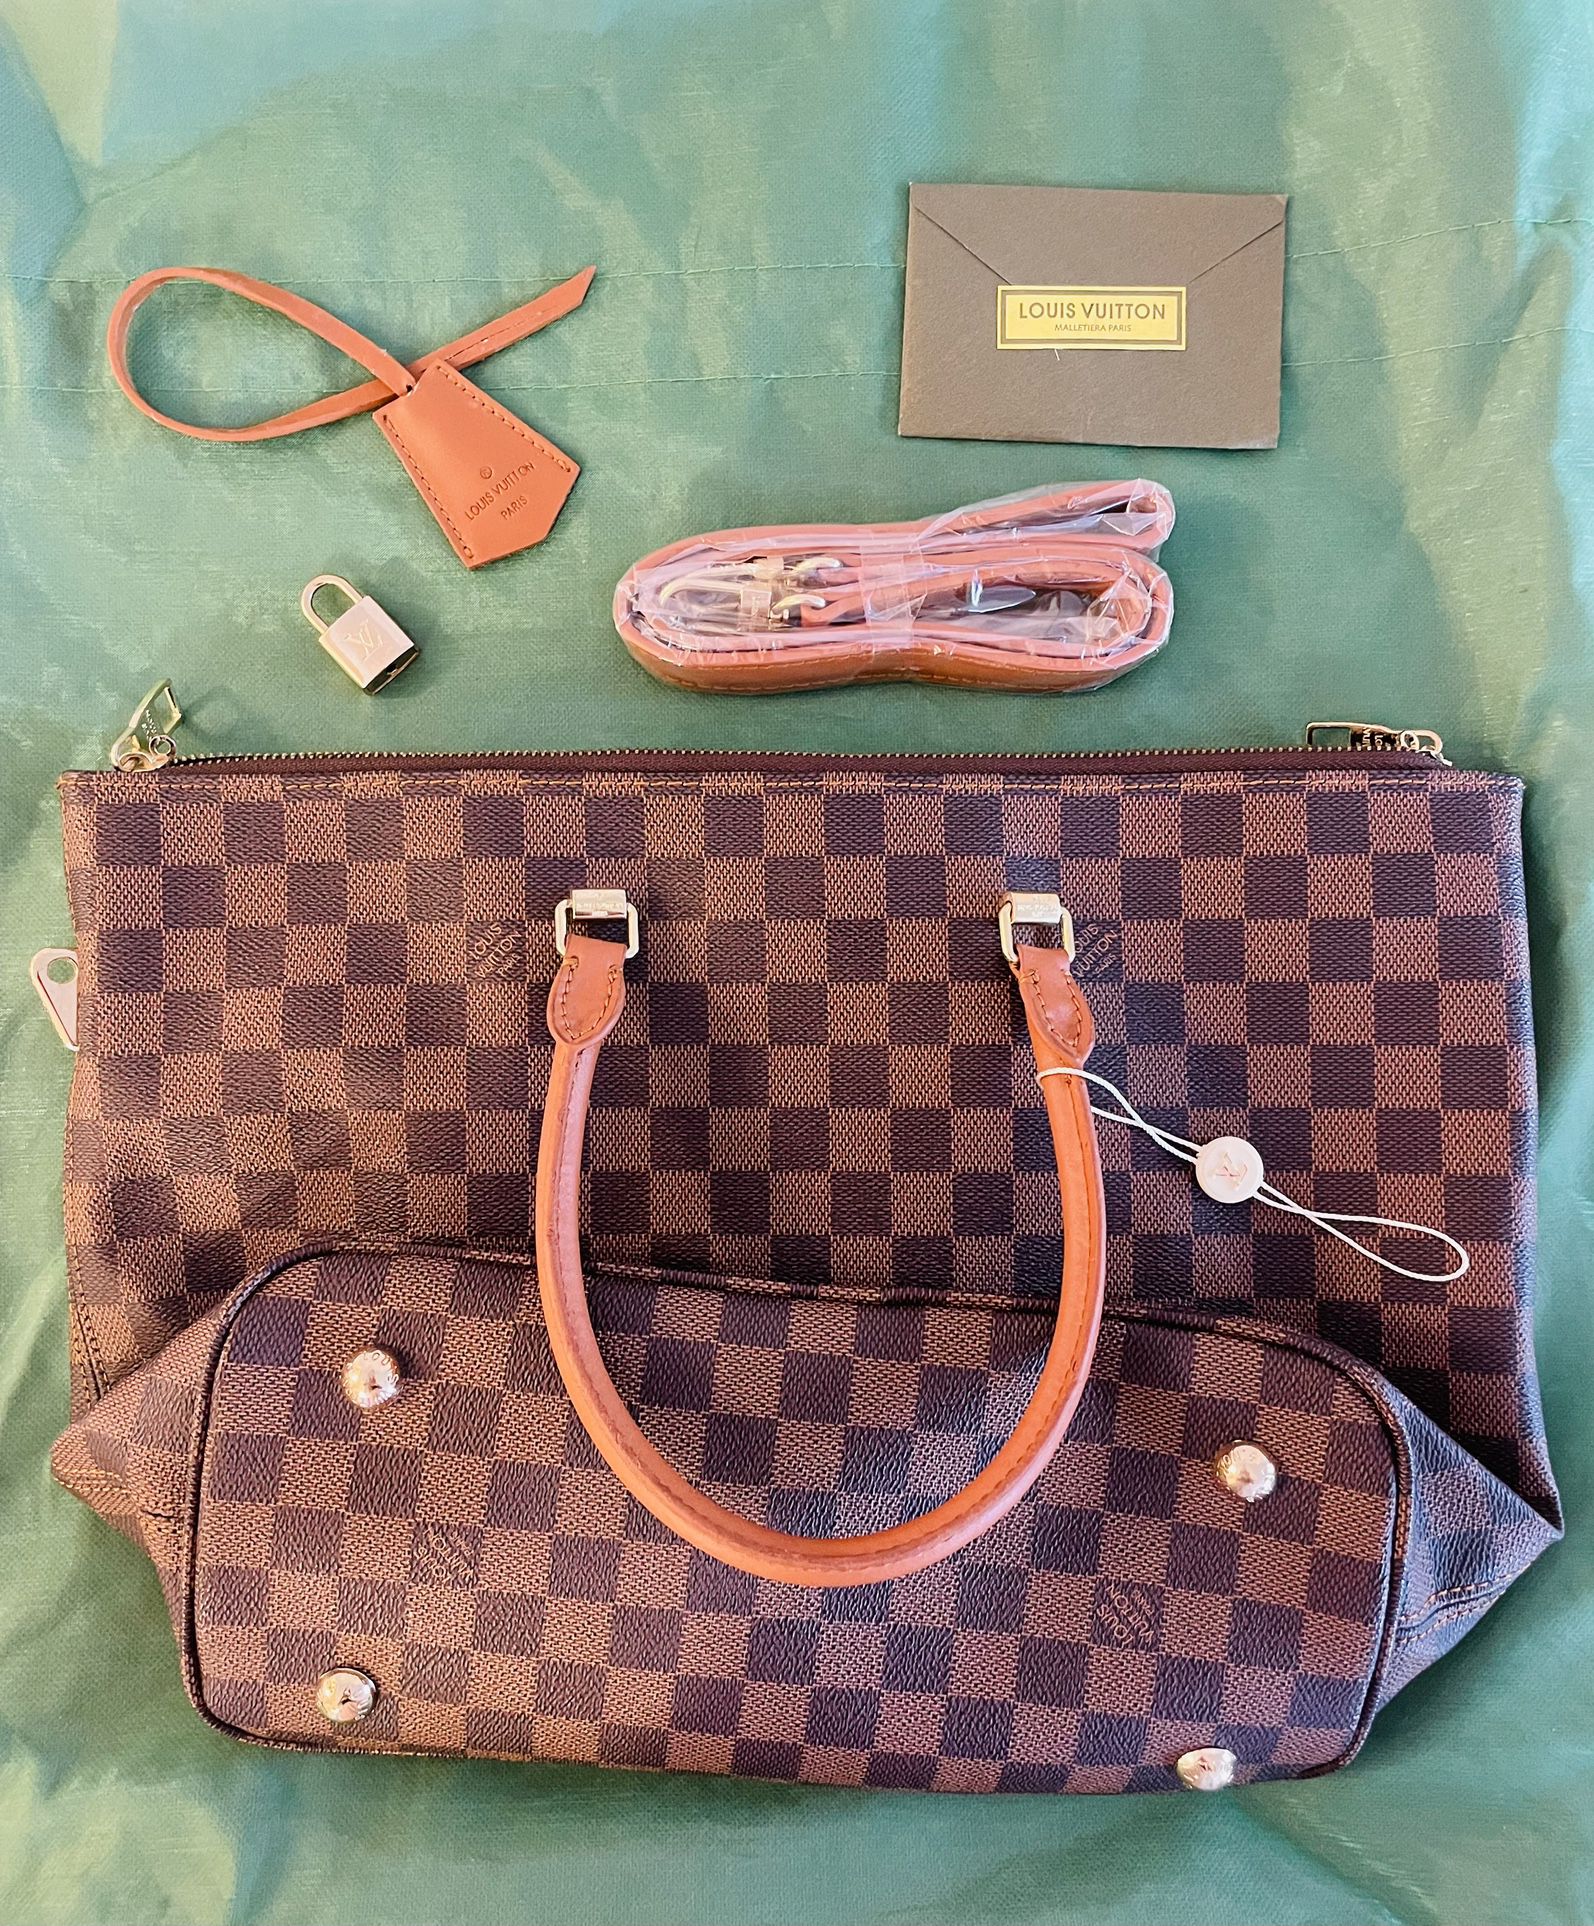 Authentic Louis Vuitton Wallet for Sale in Miami, FL - OfferUp